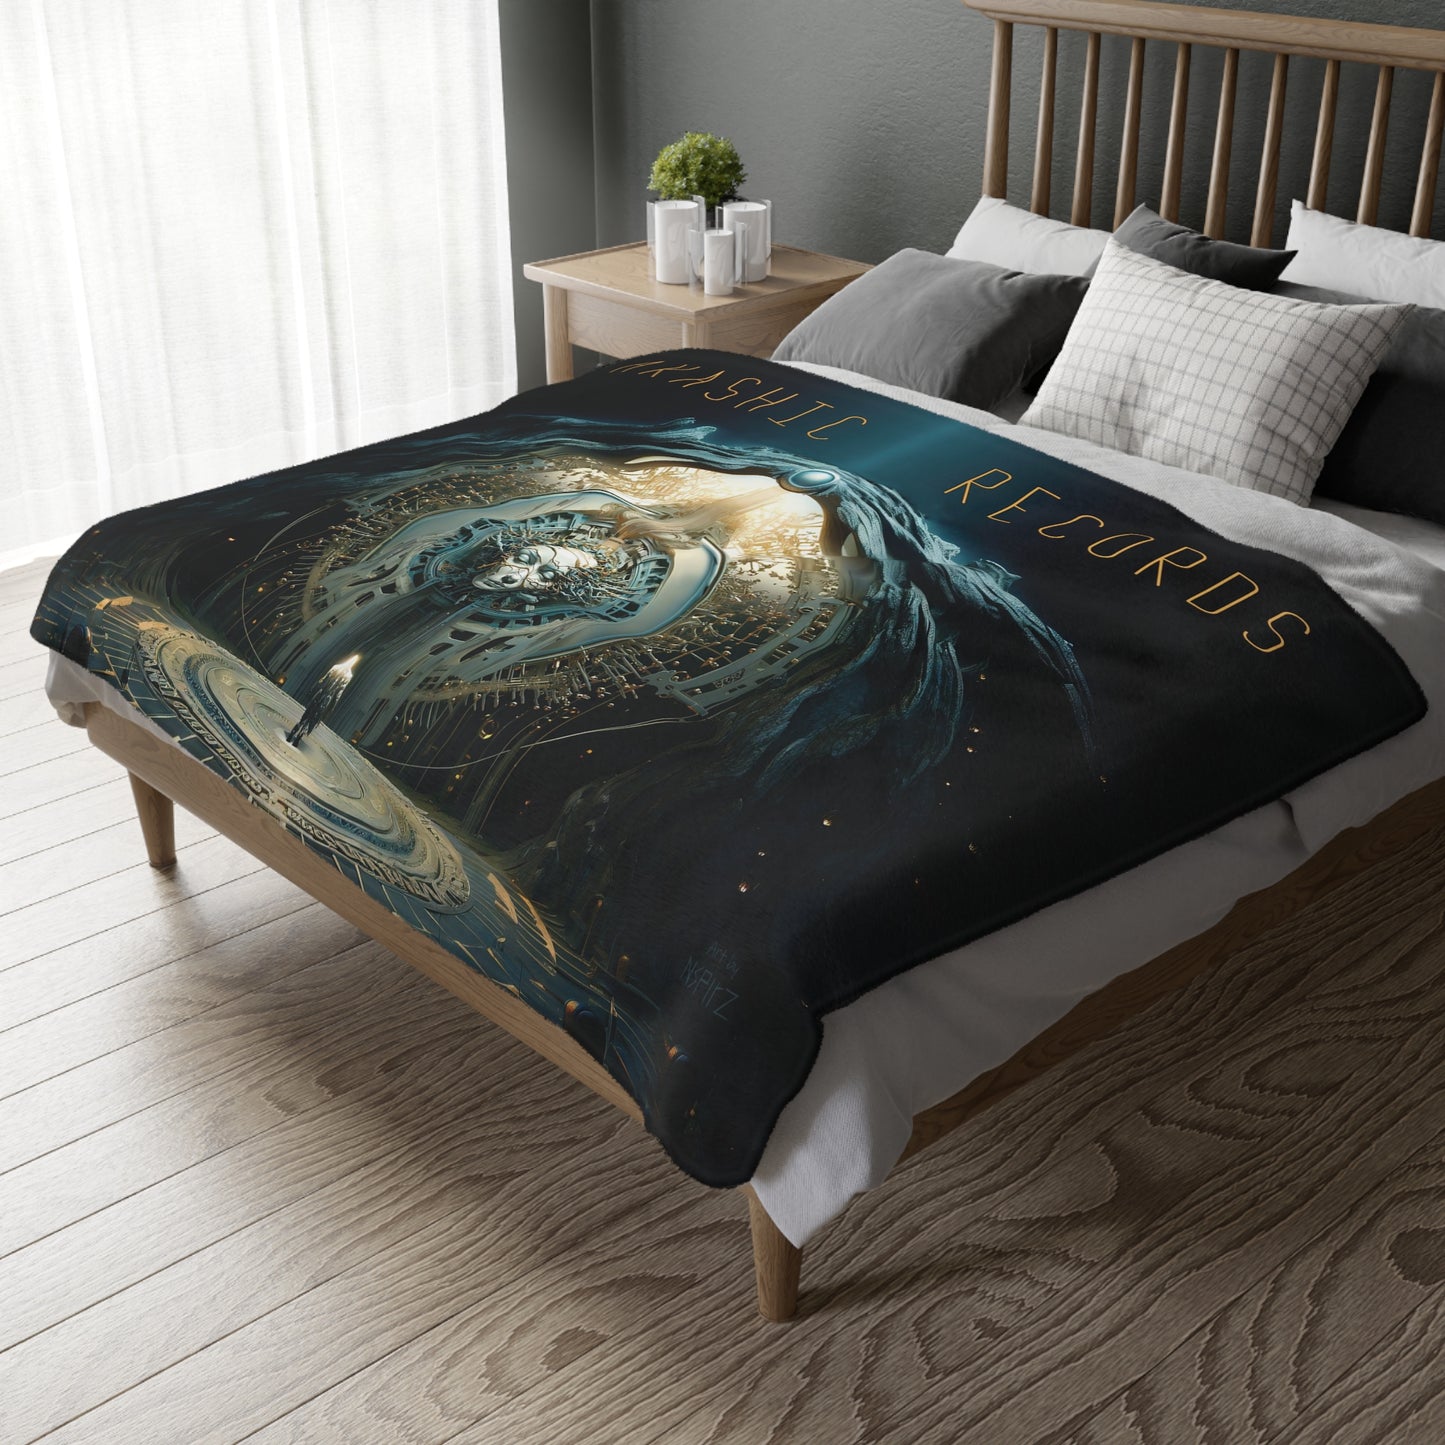 Akashic Records (Exclusive - Double Sided Original Art Blanket)